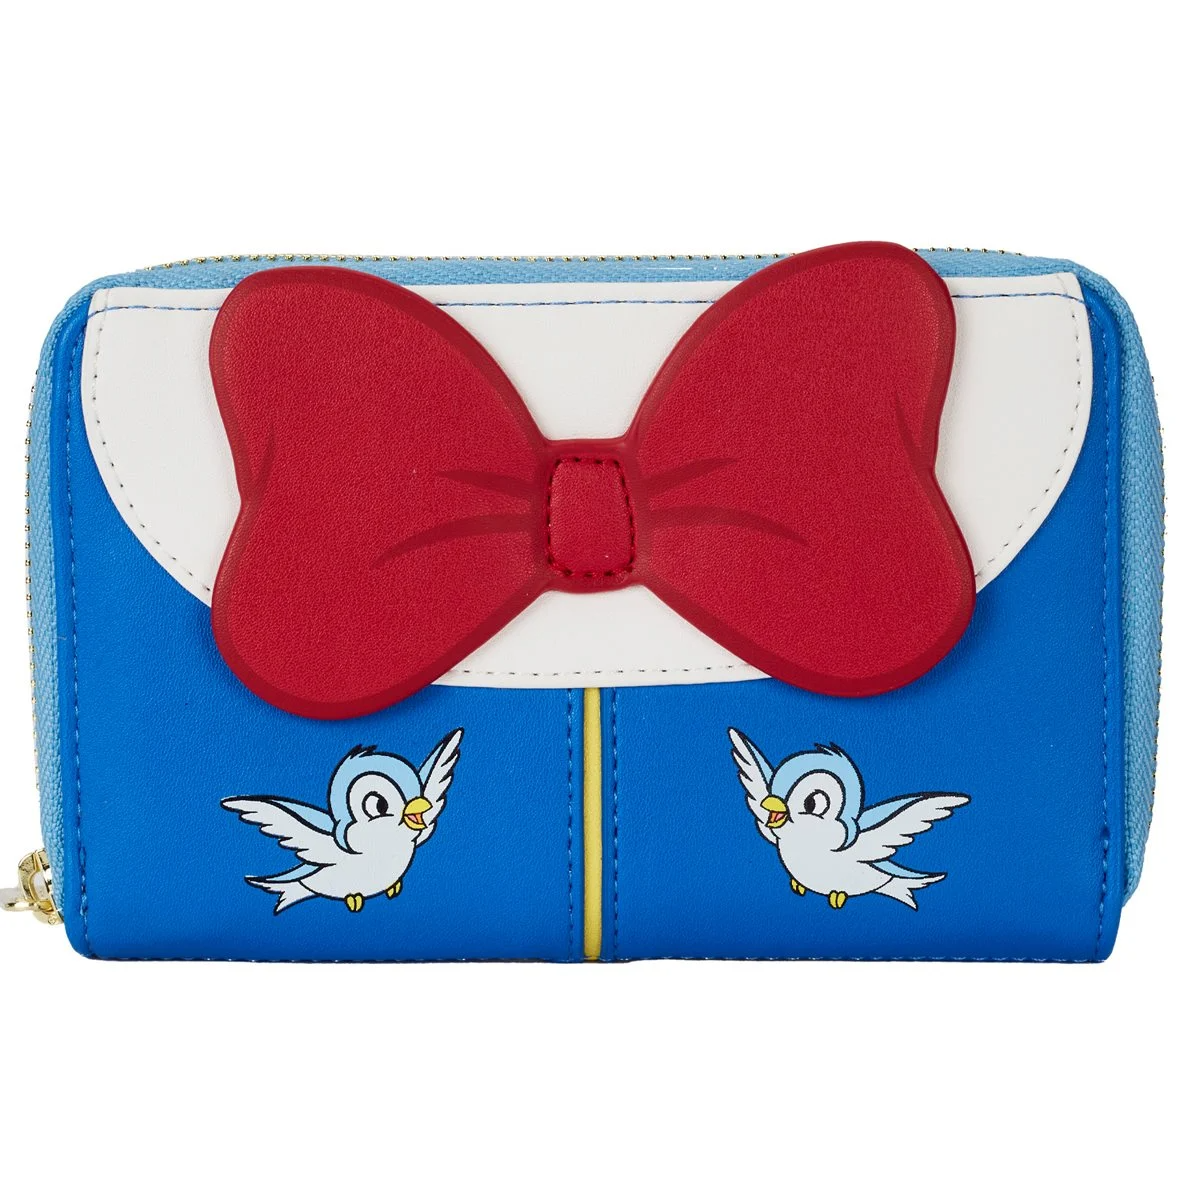 LOUNGEFLY DISNEY SNOW WHITE BOW ZIP WALLET